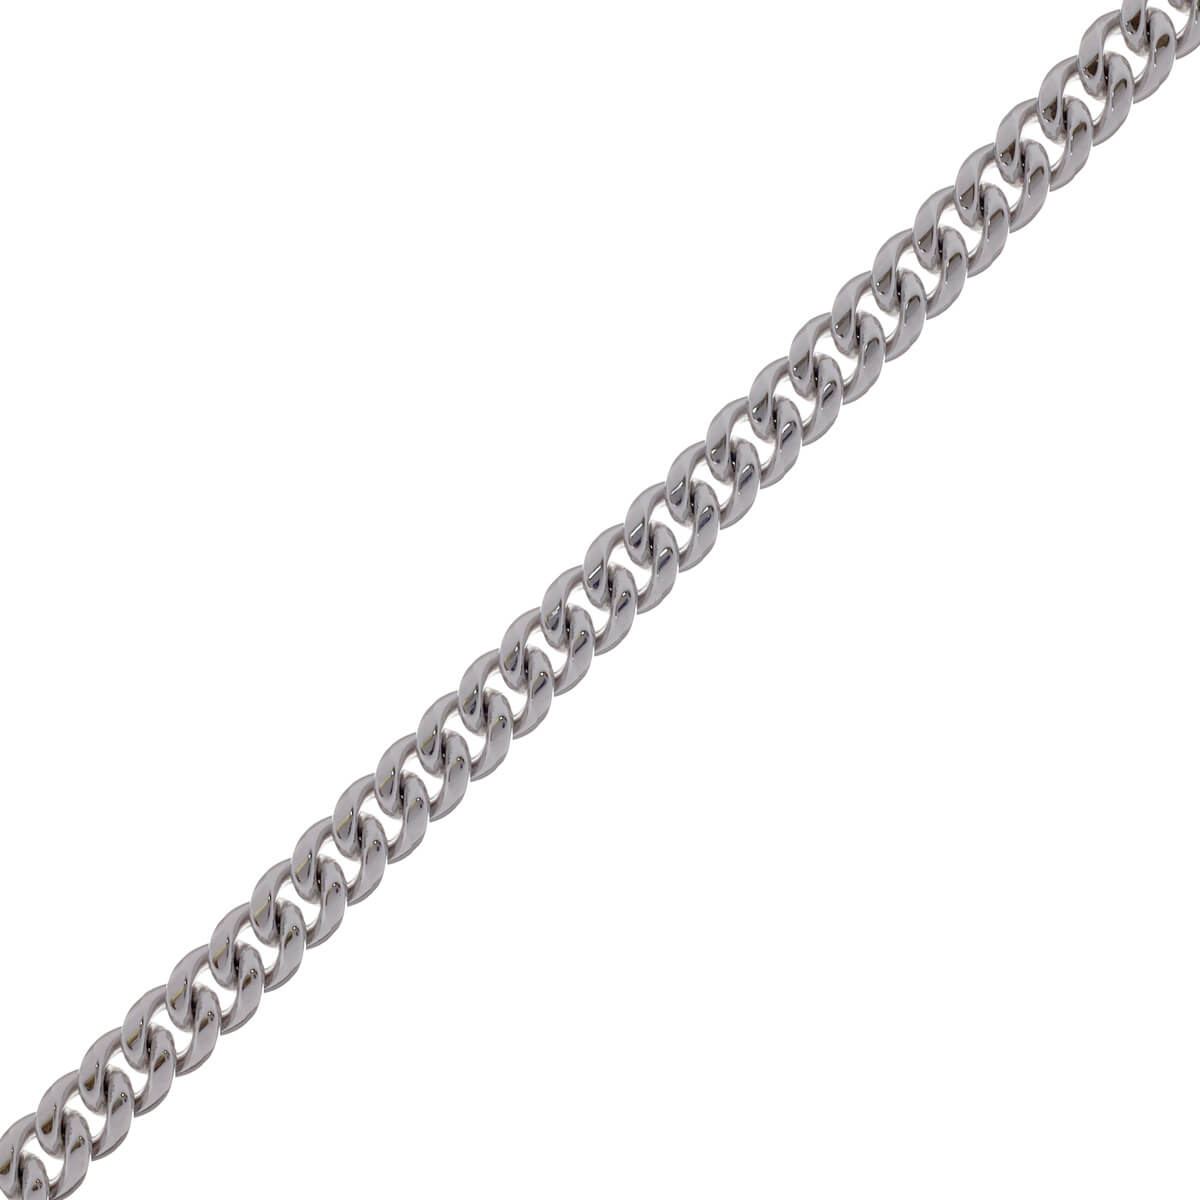 Dense armoured chain steel necklace 55cm